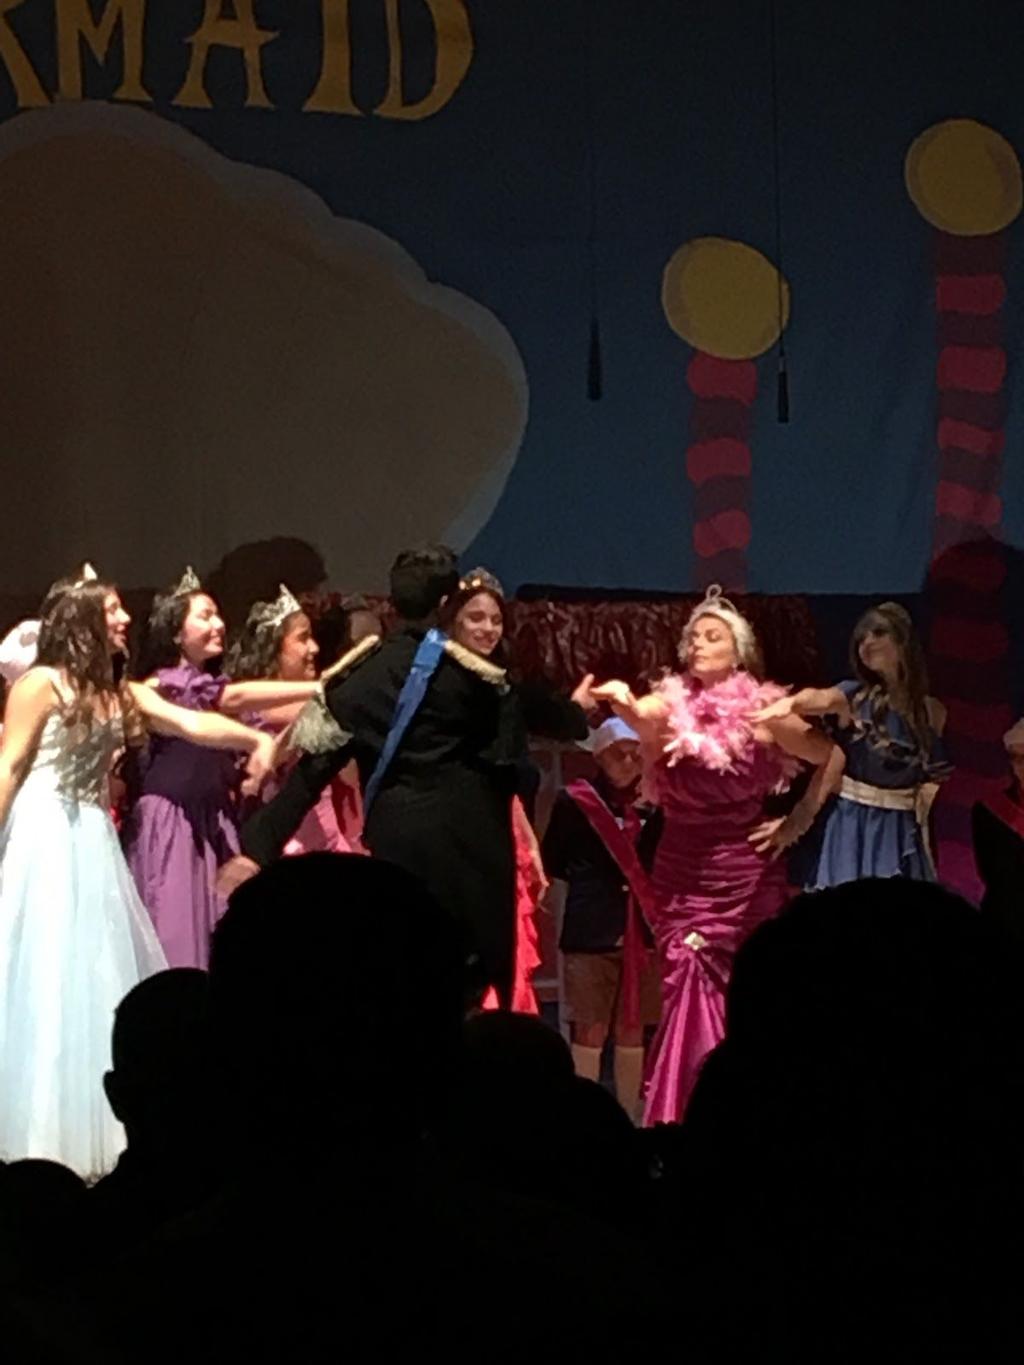 The show featured The Little Mermaid.